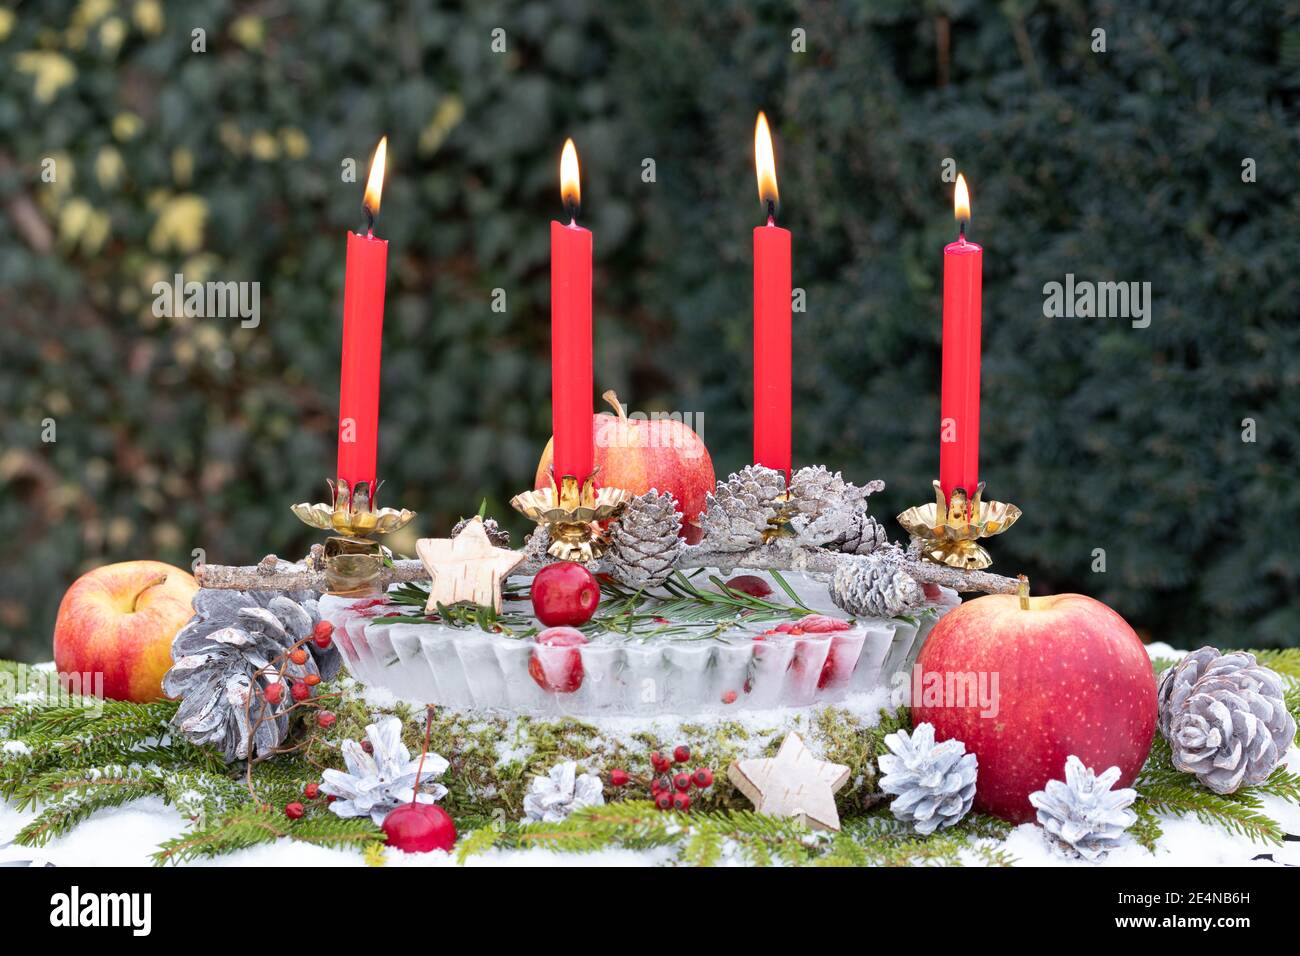 christmas garden decoration with red advent candles Stock Photo